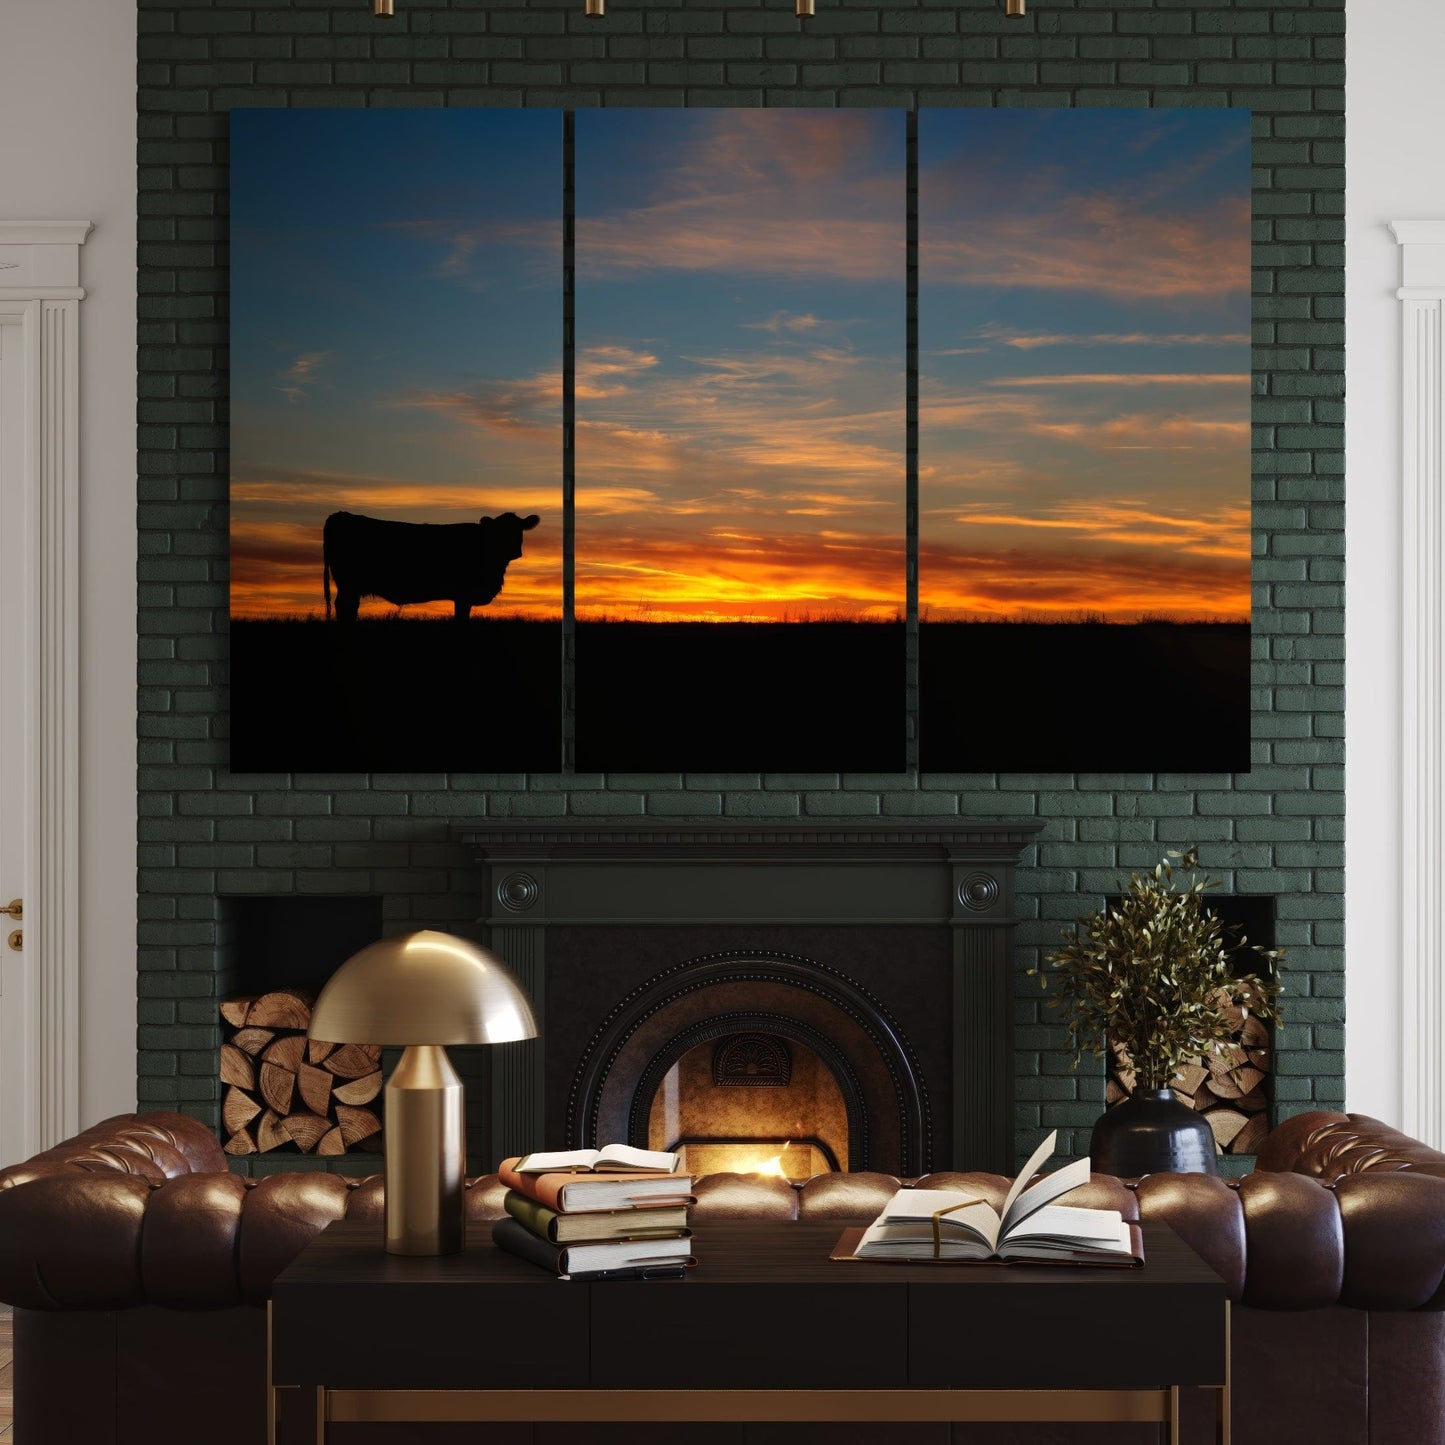 Extra Large Western Wall Art - Angus Sunset Triptych Wall Art Teri James Photography